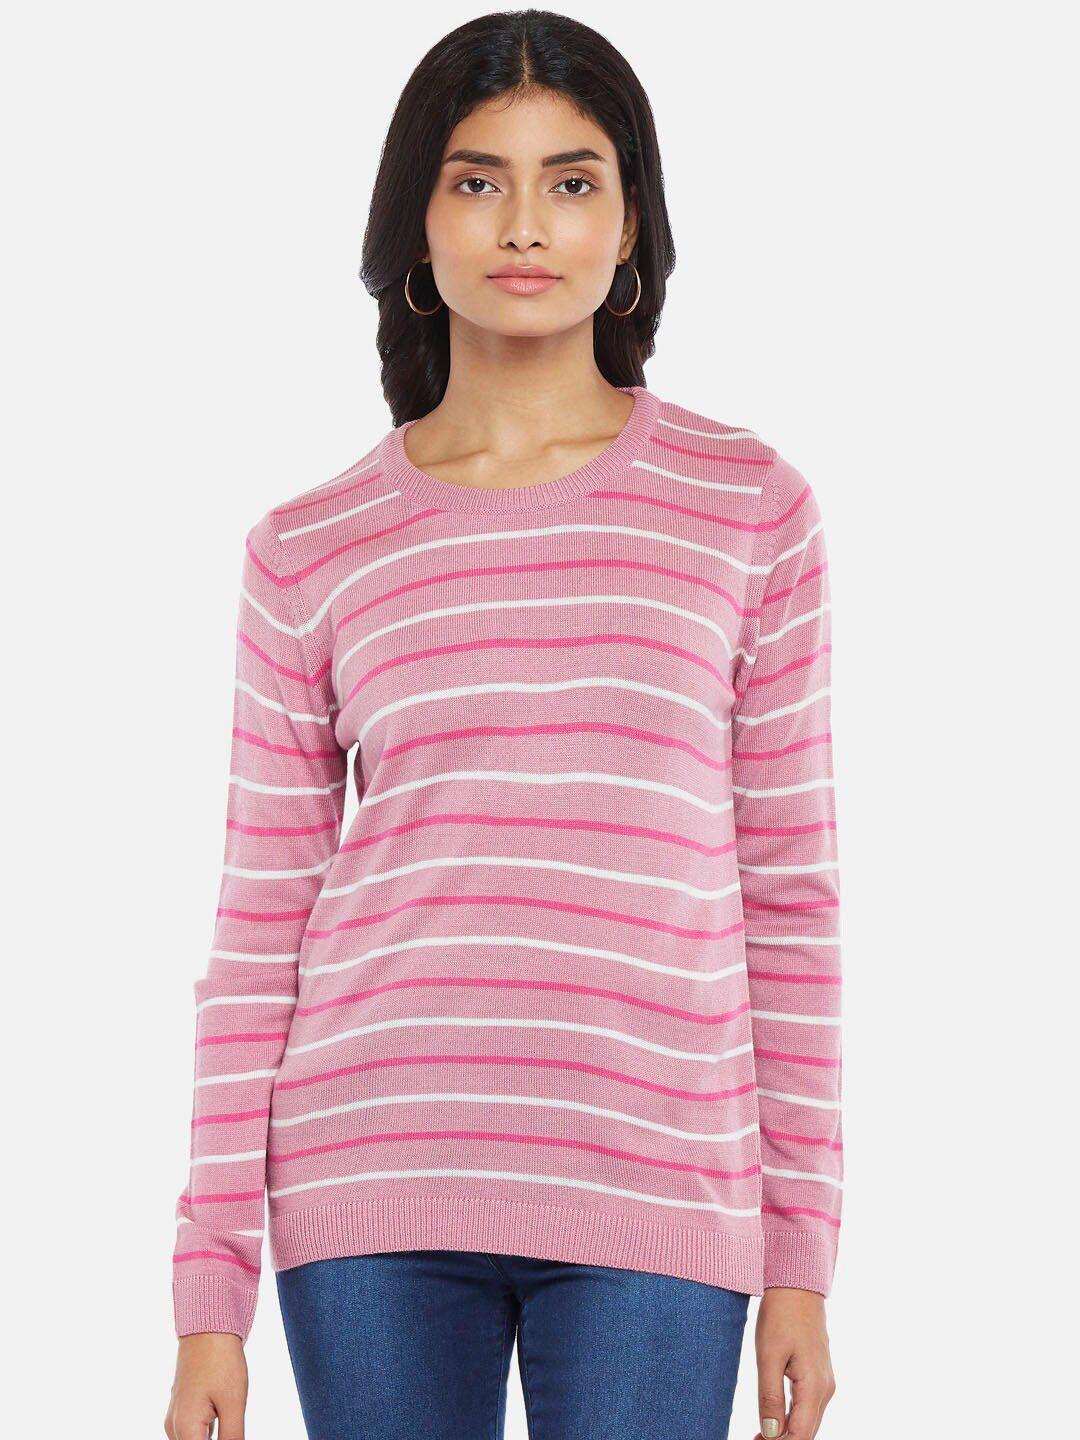 honey by pantaloons pink & white striped top